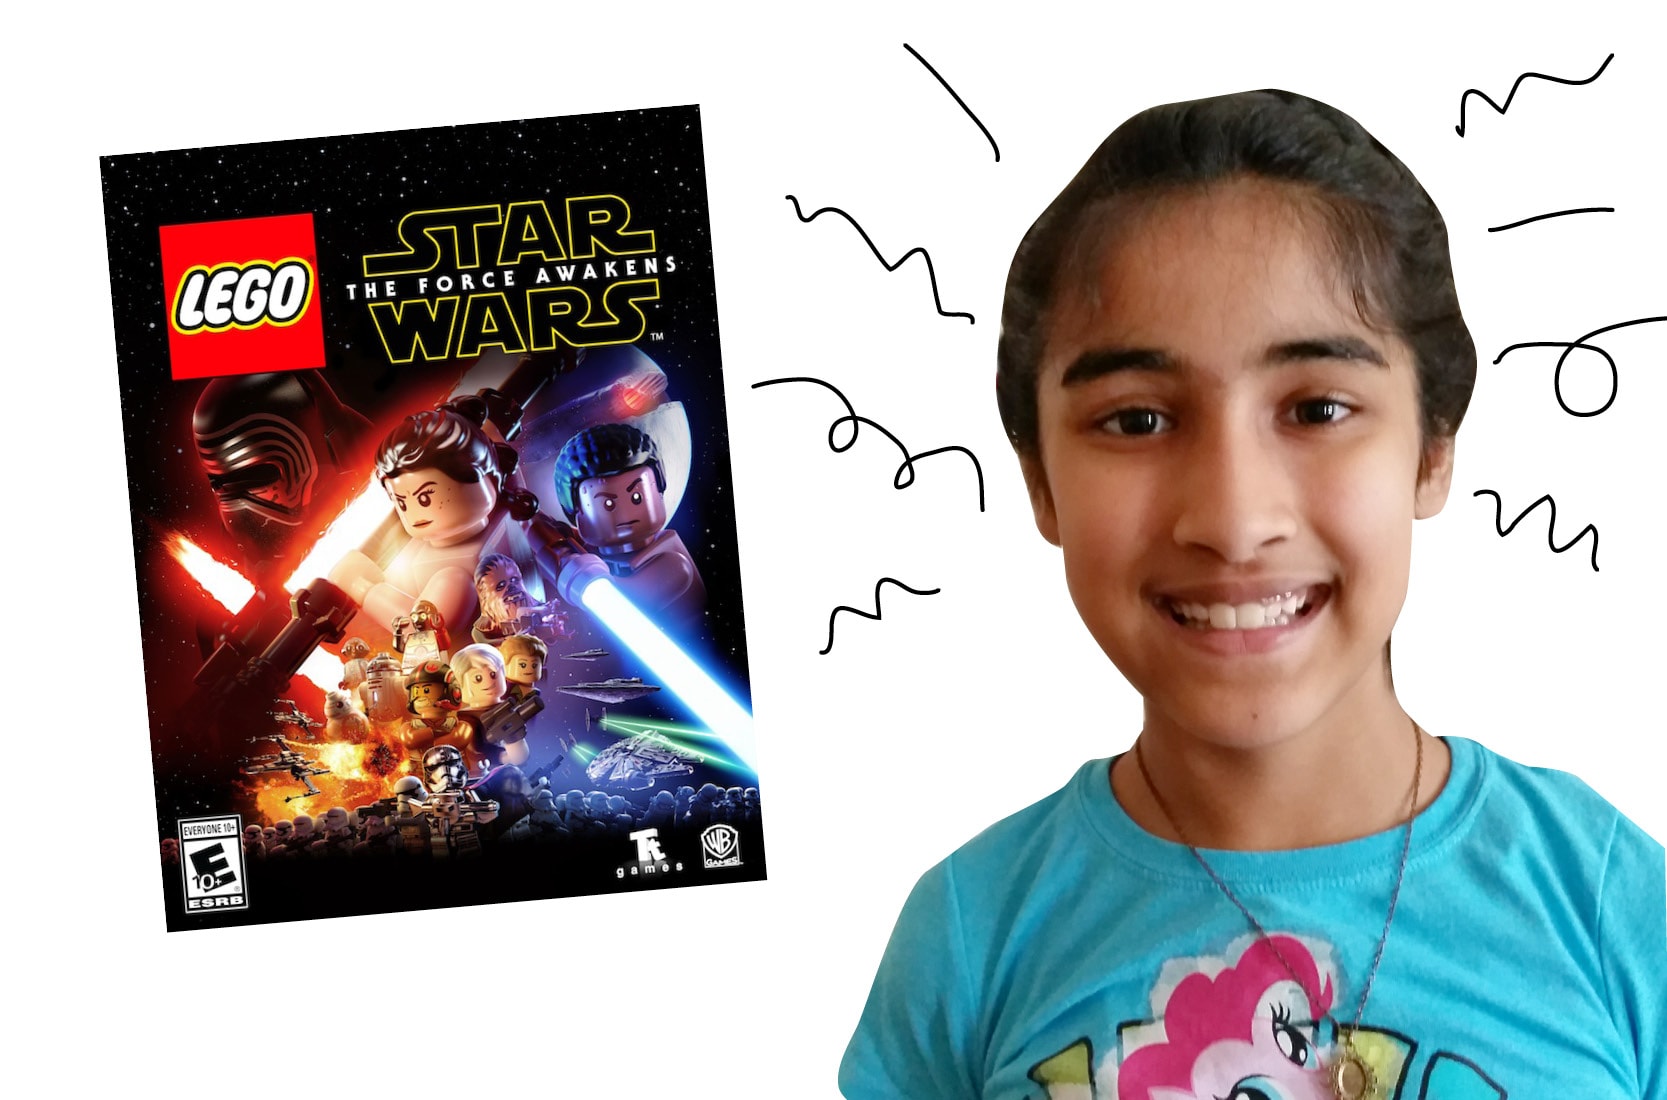 OWL reader Paavni and LEGO Star Wars: The Force Awakens video game